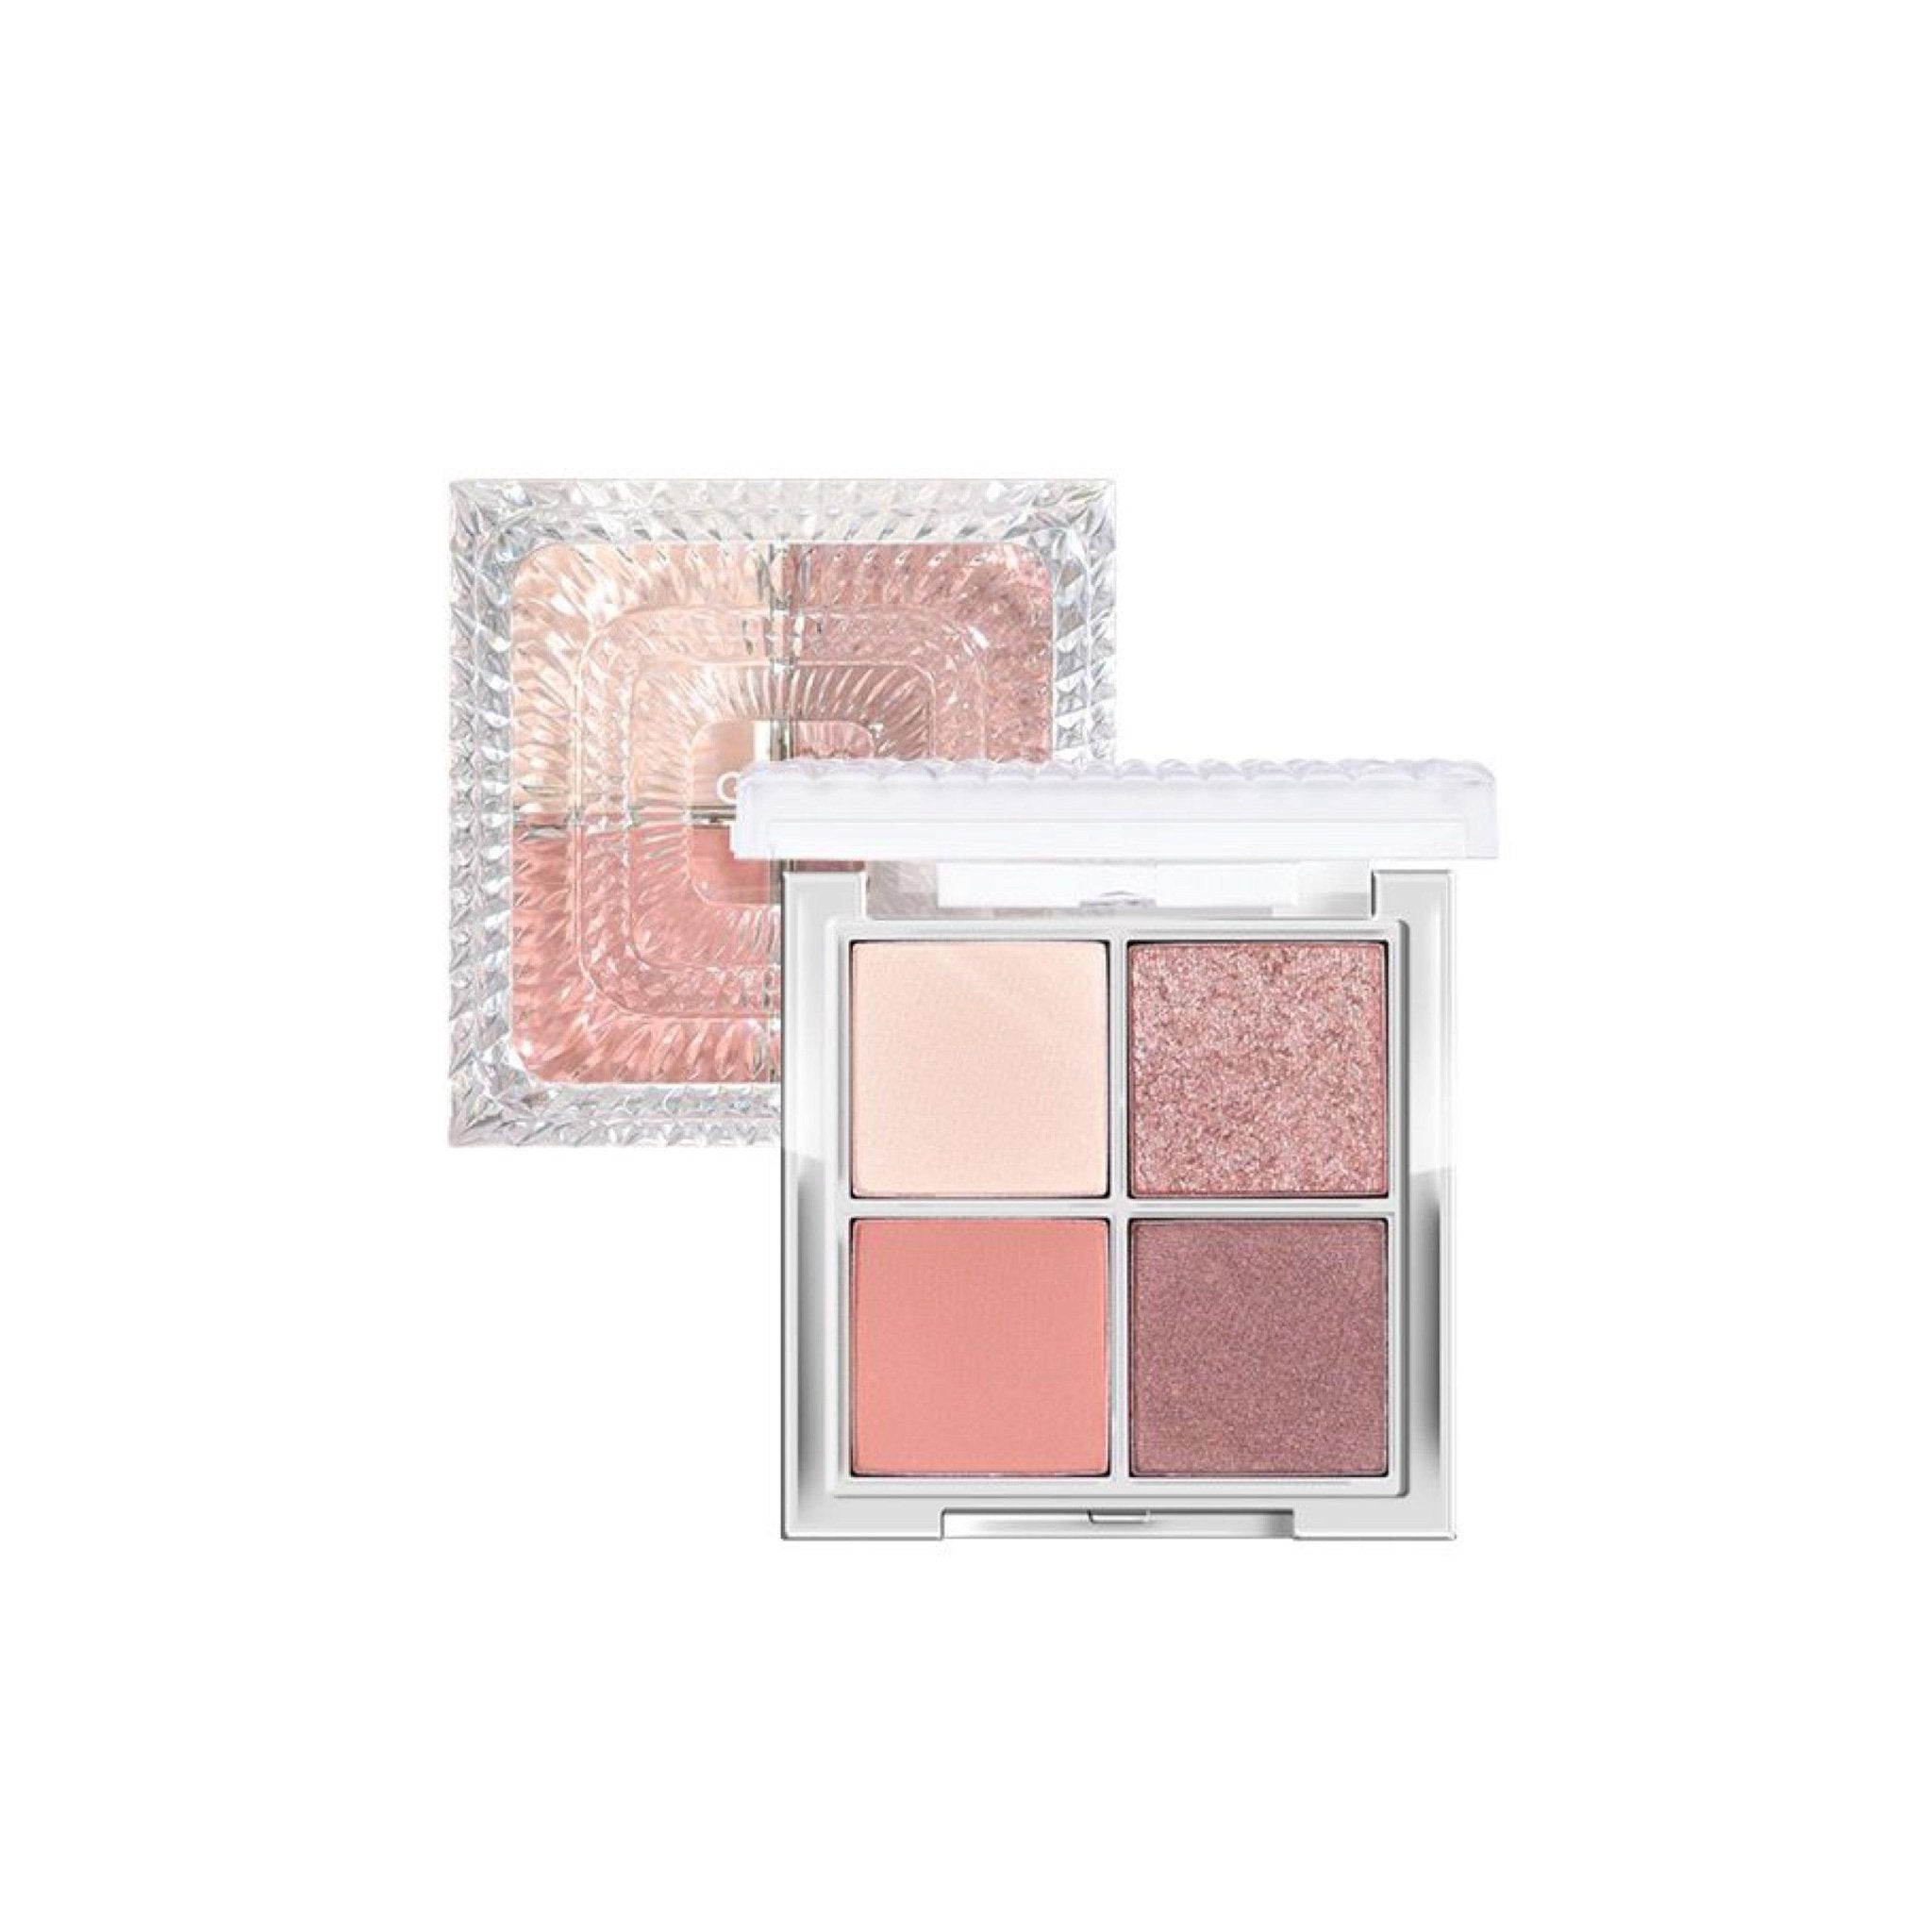 GOGO TALES Light and Shadow Eye Palette GT542 - Chic Decent